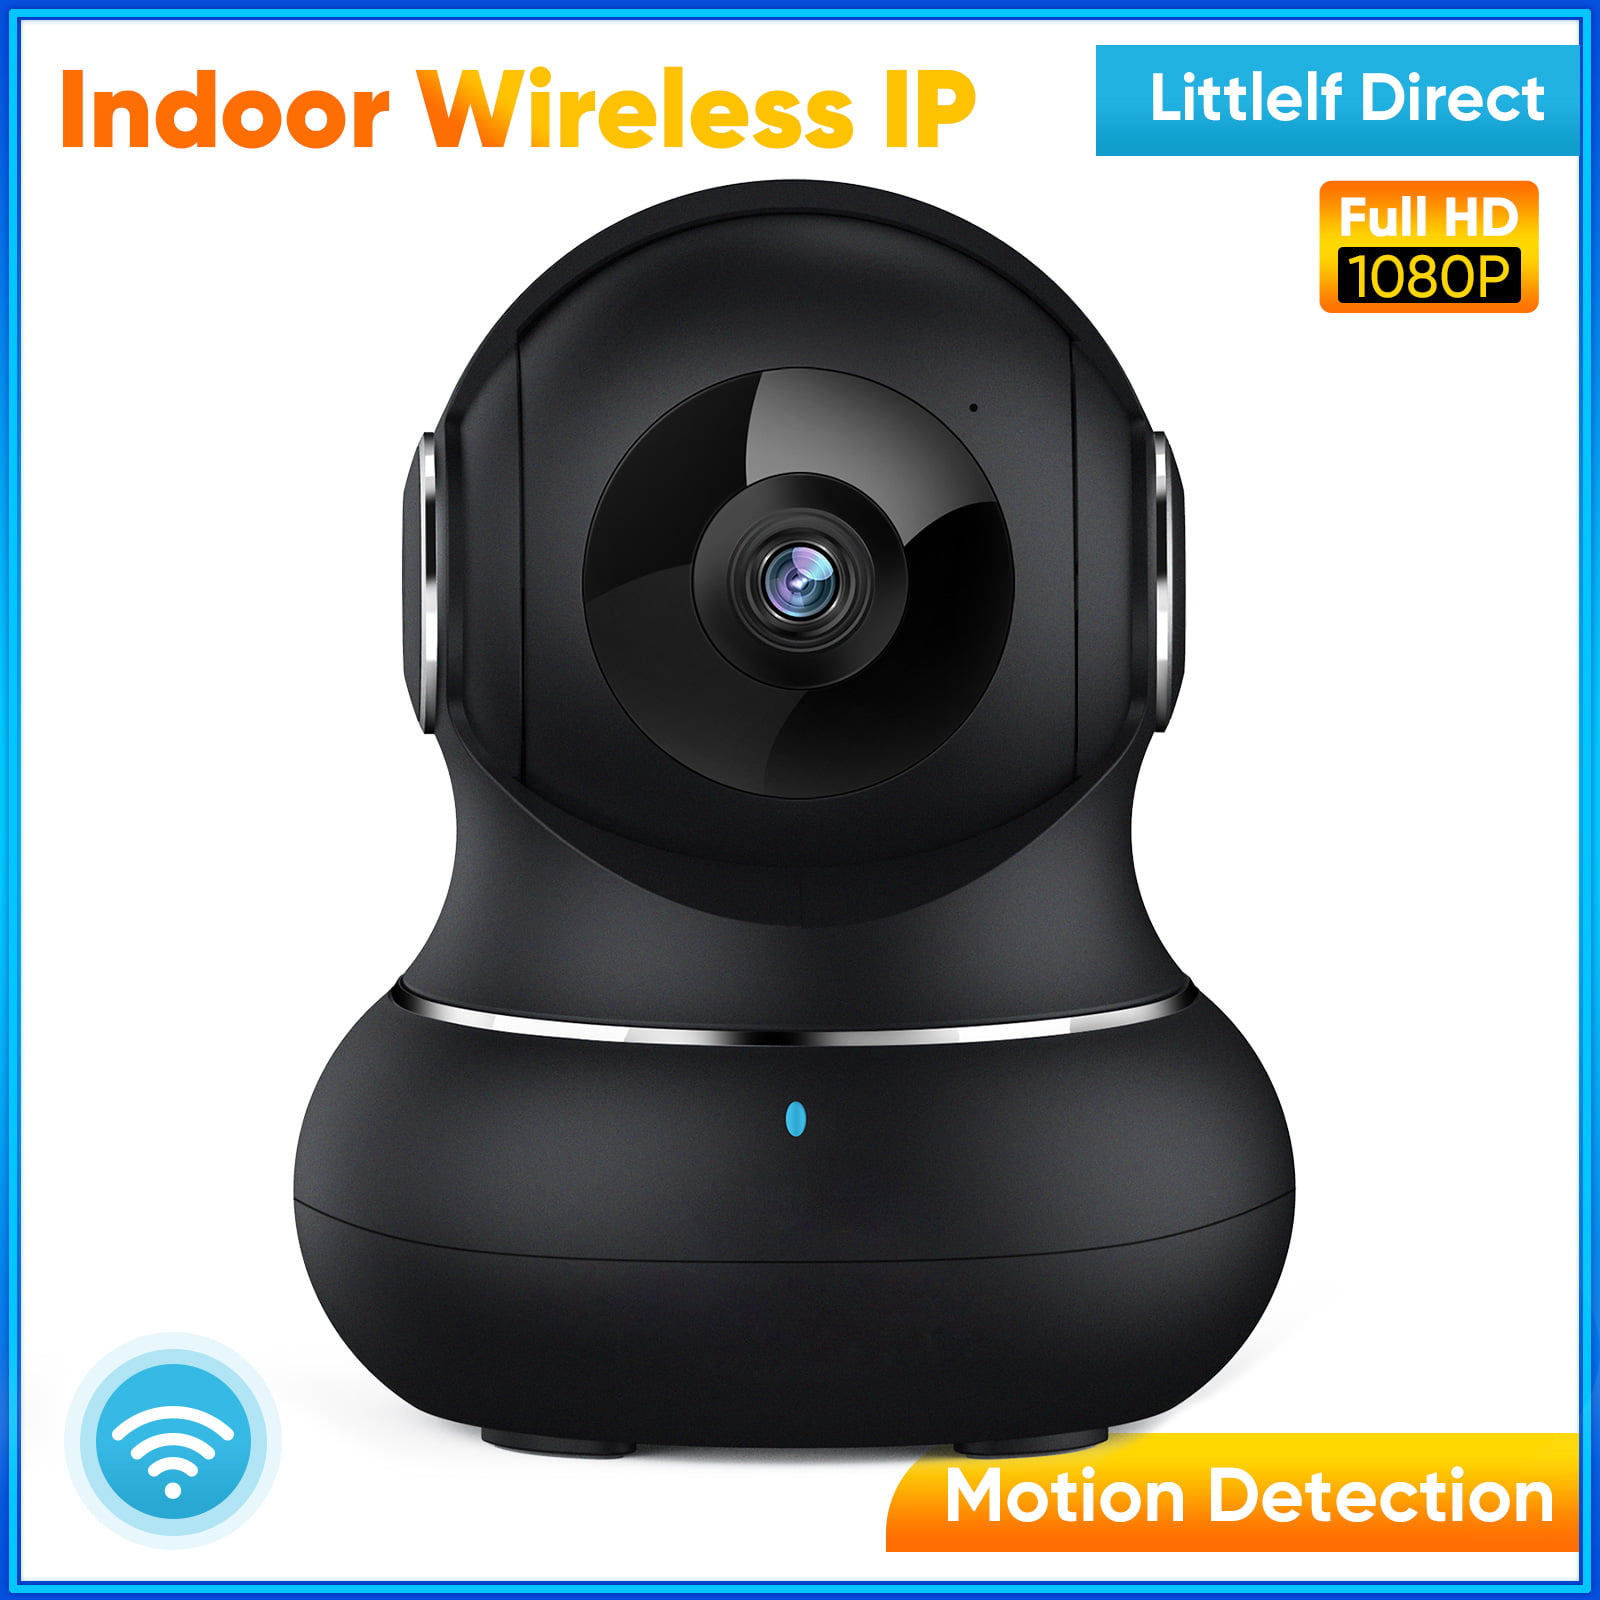 Littlelf WiFi Pet Camera Two-Way Audio Super IR Night Vision 360-degree Wireless IP Home Security Camera Baby Monitor Motion Detection 